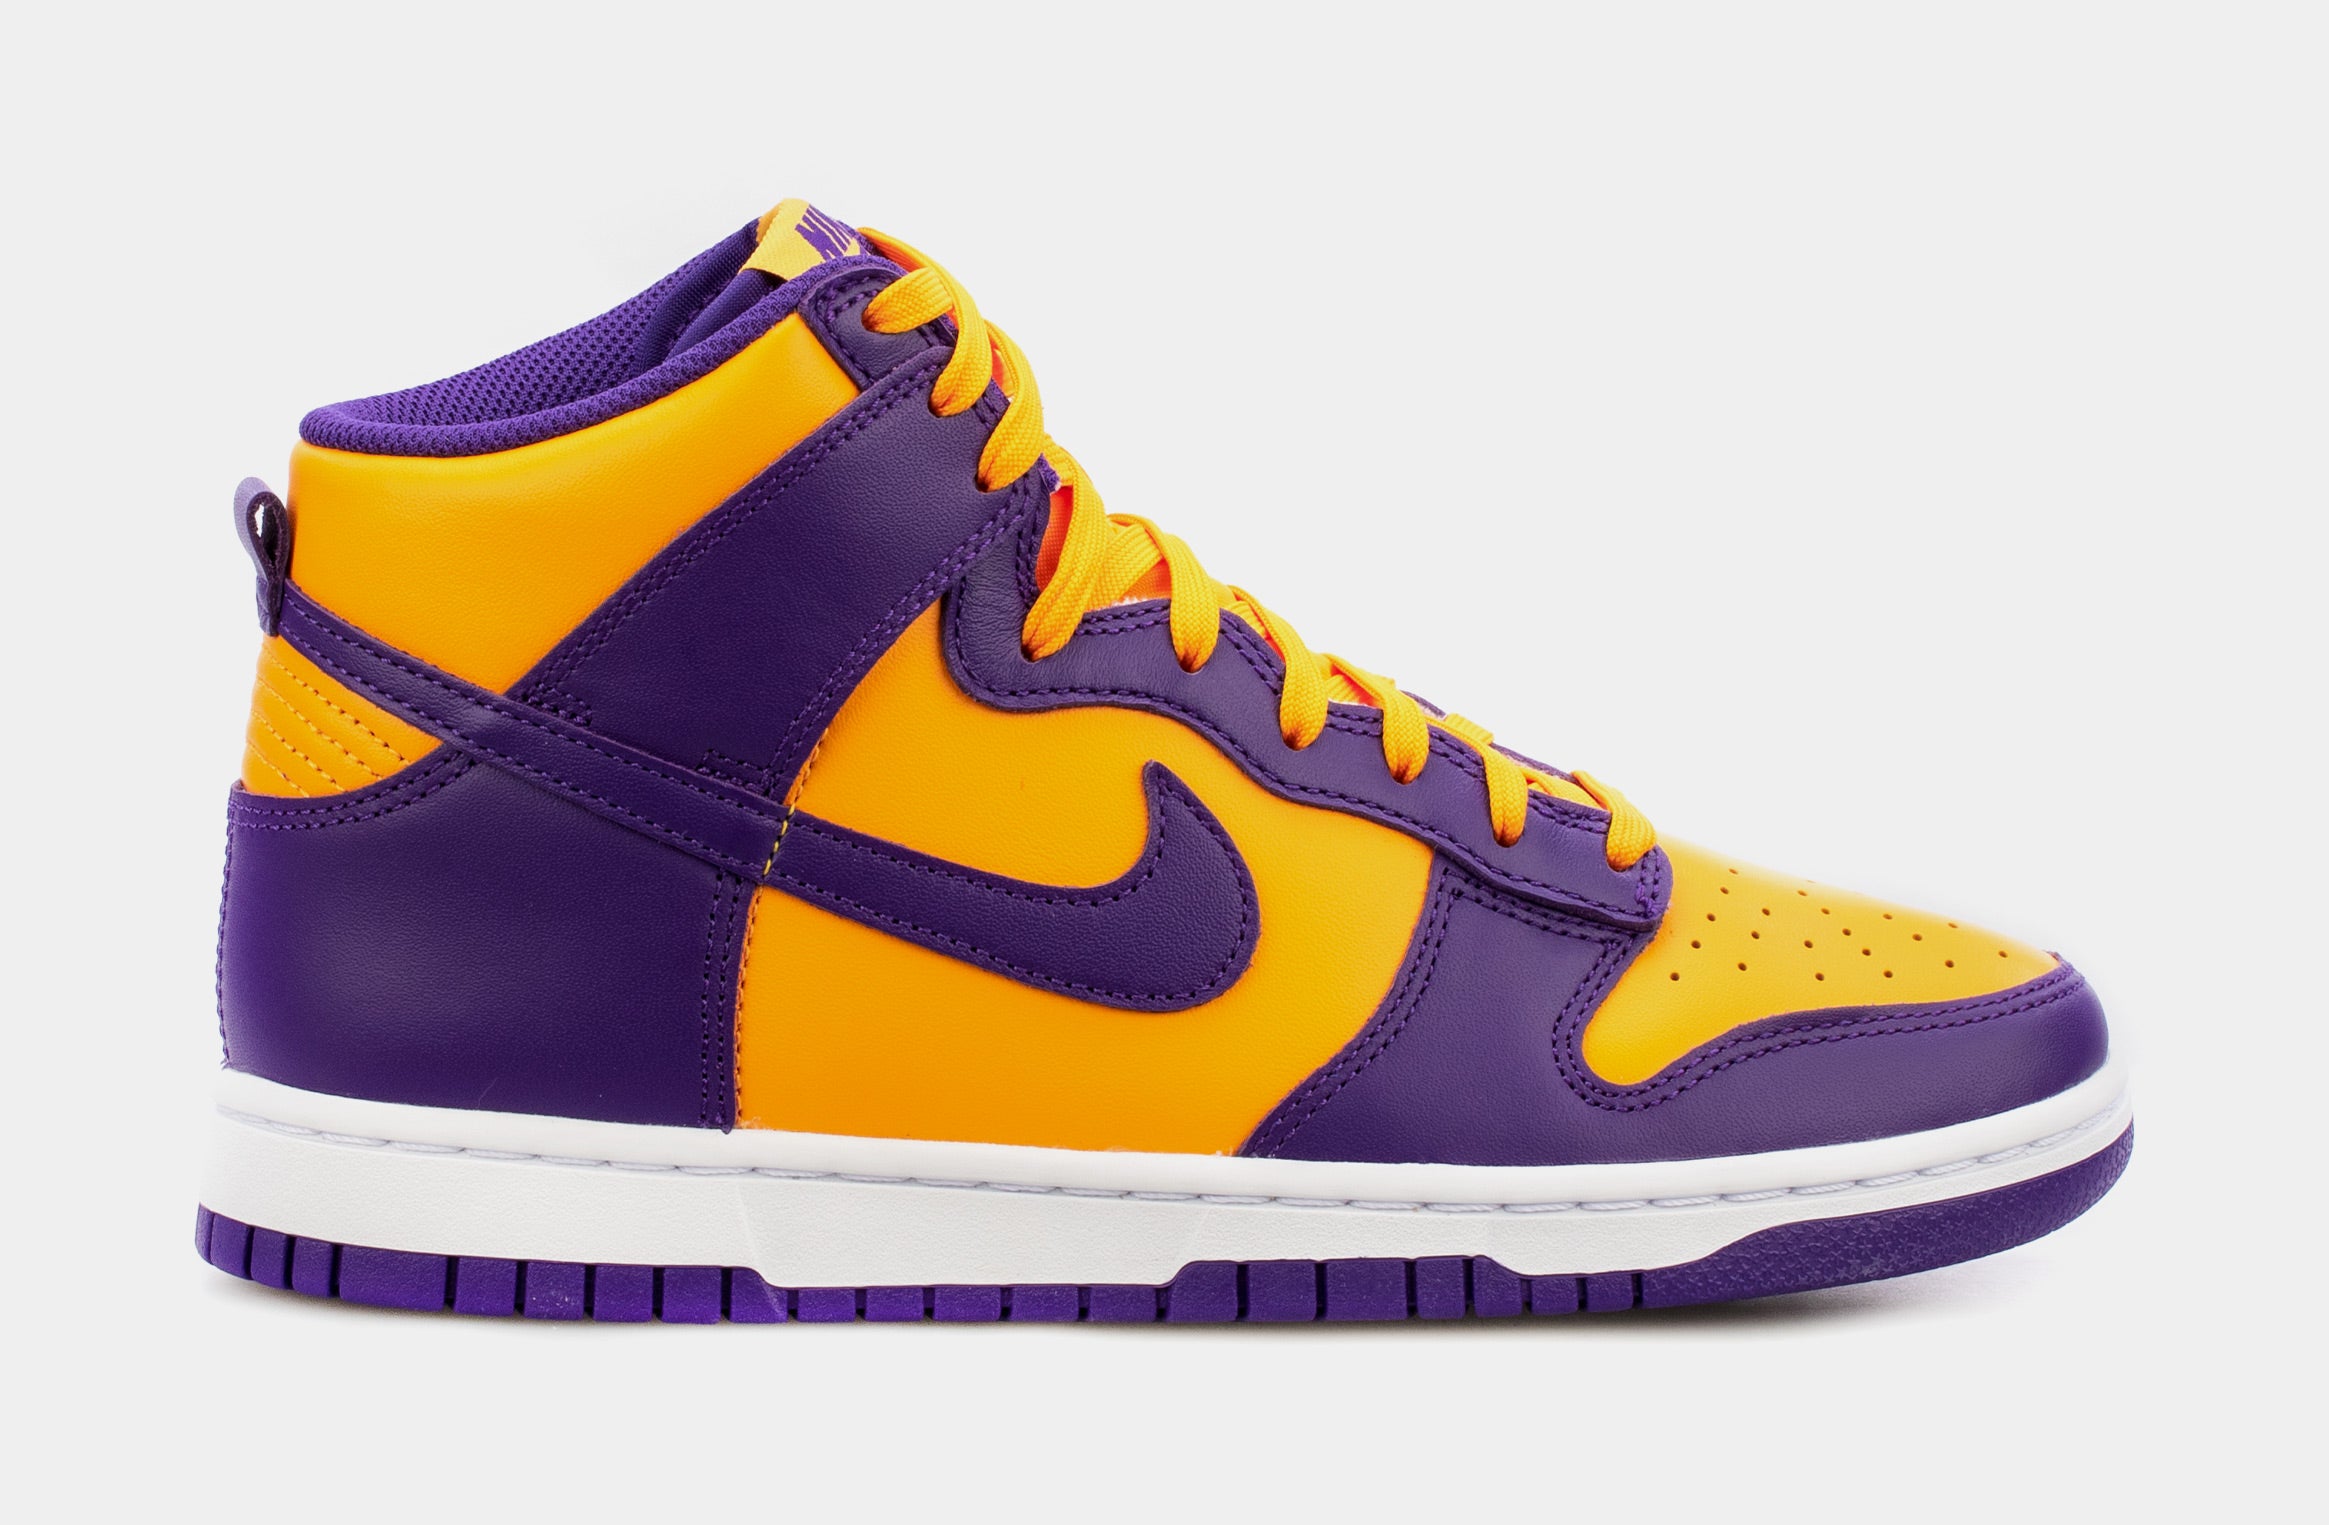 Los Angeles Lakers Purple and Gold High Tops  Jordan shoes retro, Sneakers  men fashion, All nike shoes